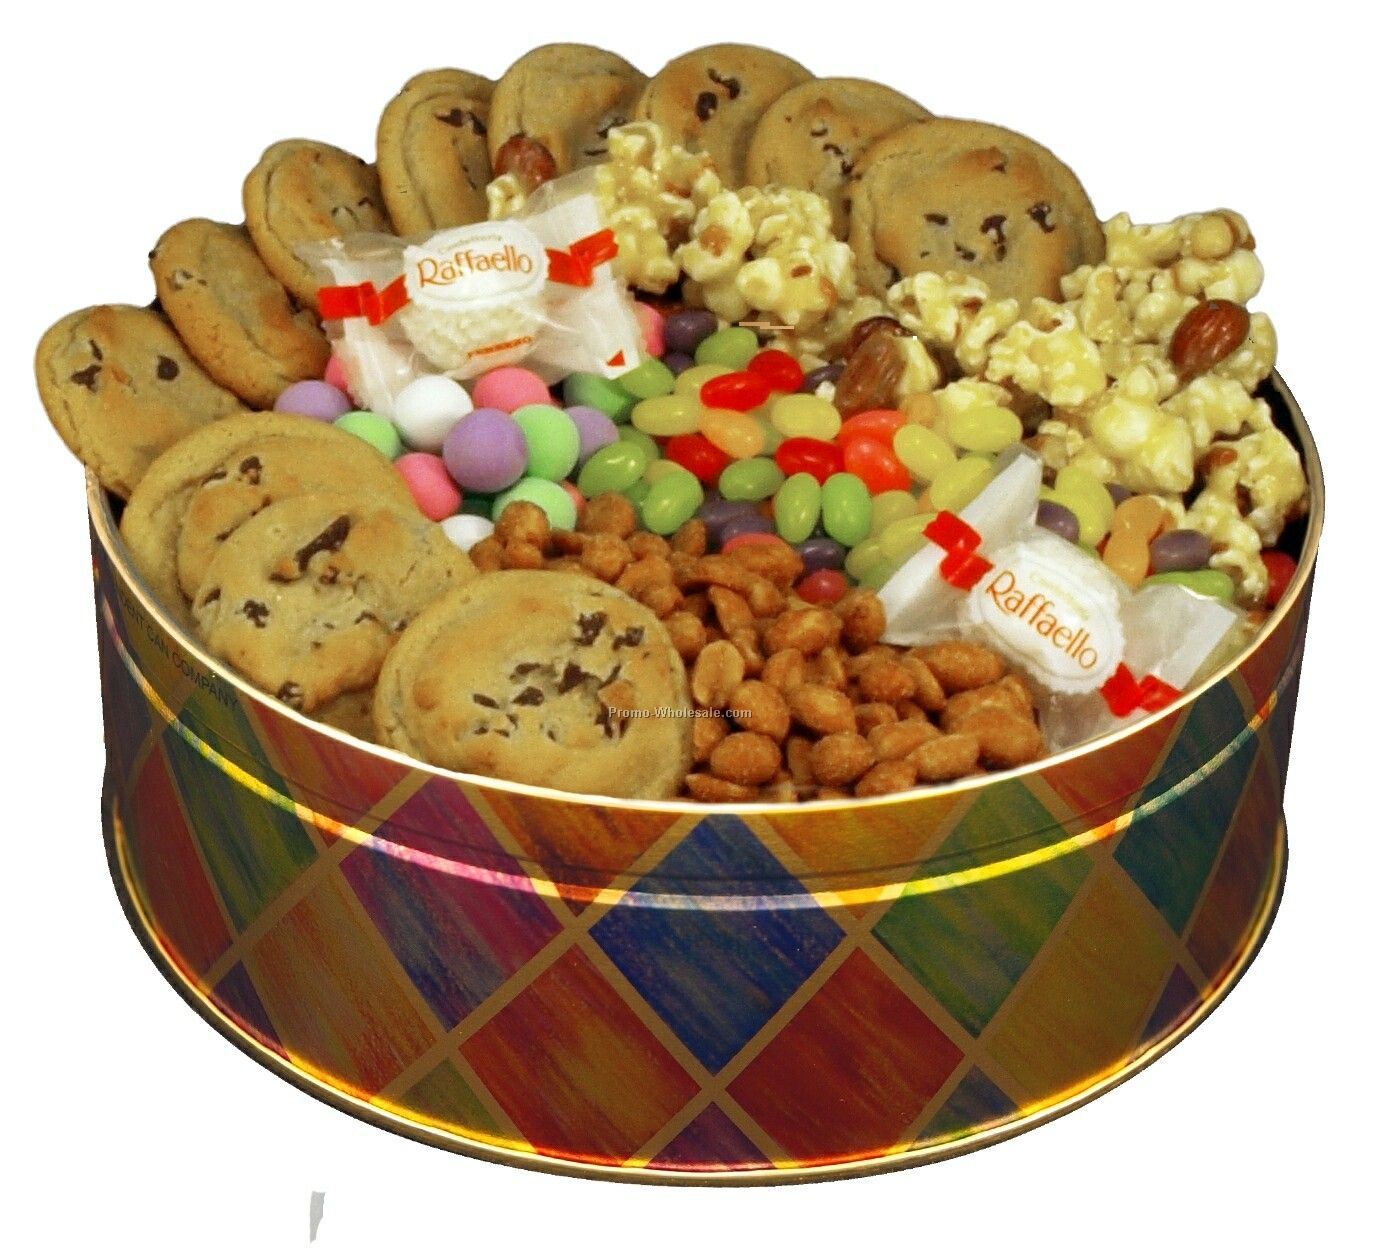 27 Oz. Snack Attack Assortment In Regular Canister